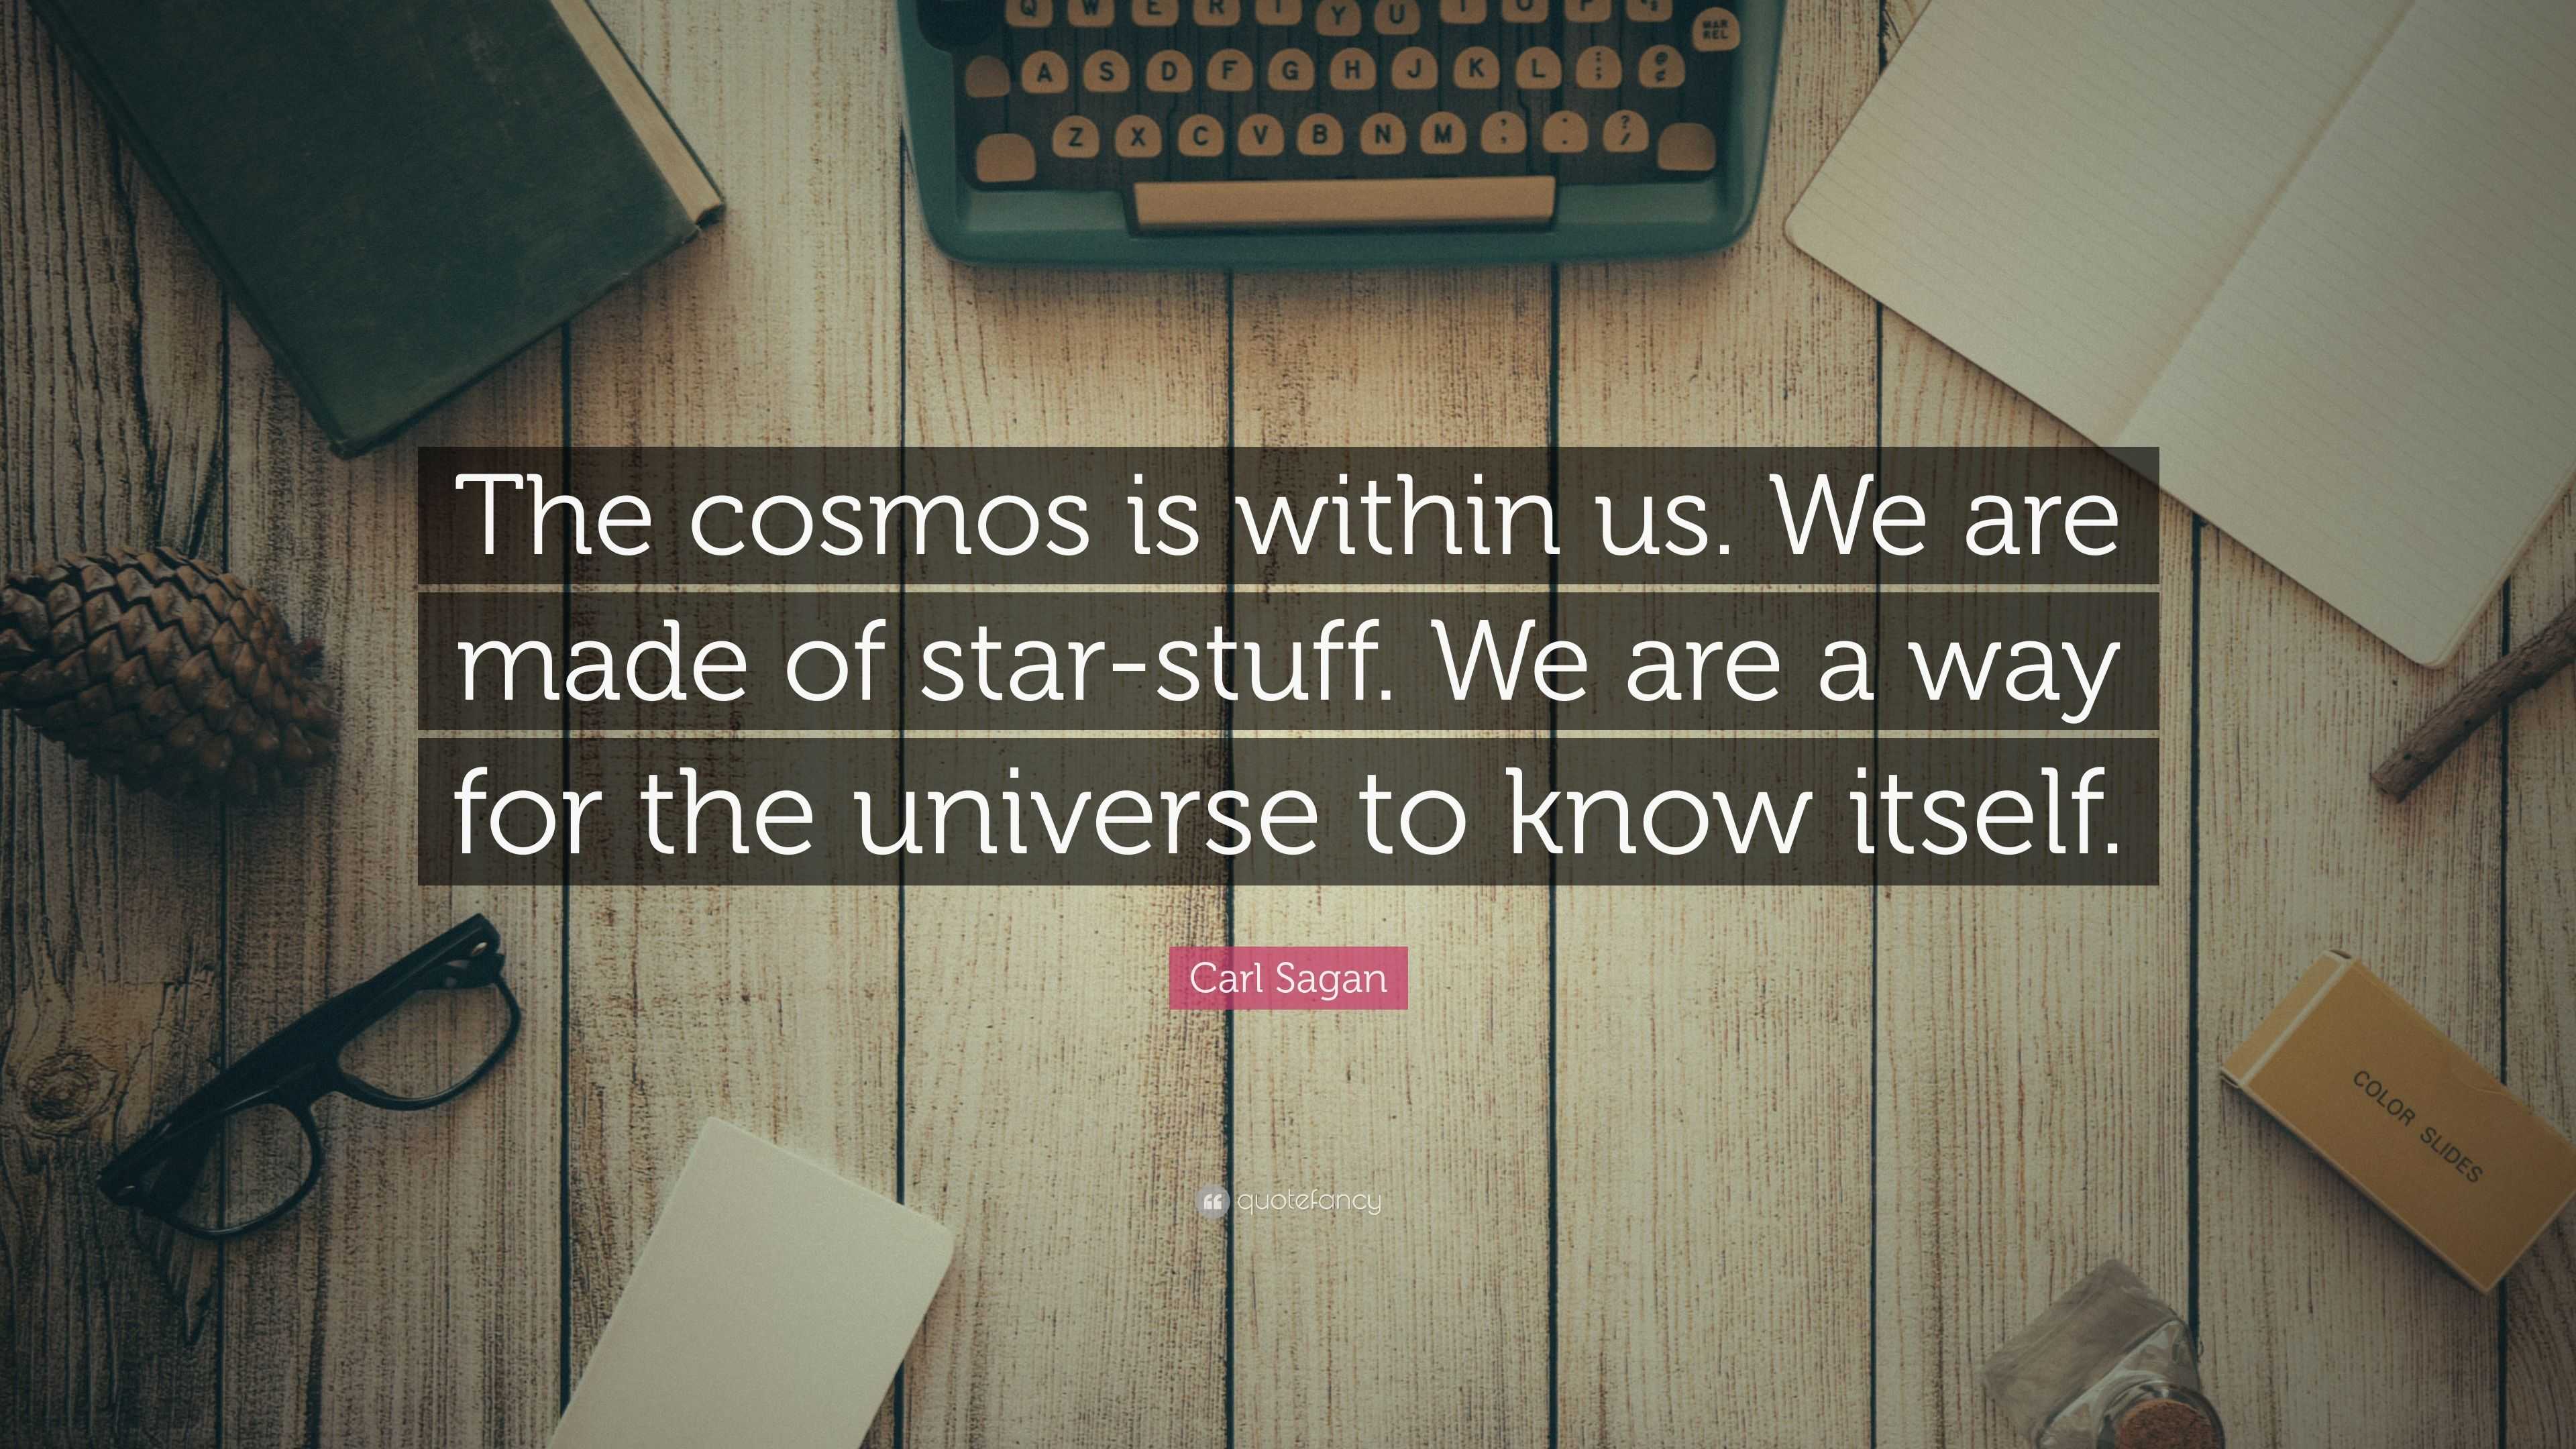 Carl Sagan Quote: “The cosmos is within us. We are made of star-stuff ...